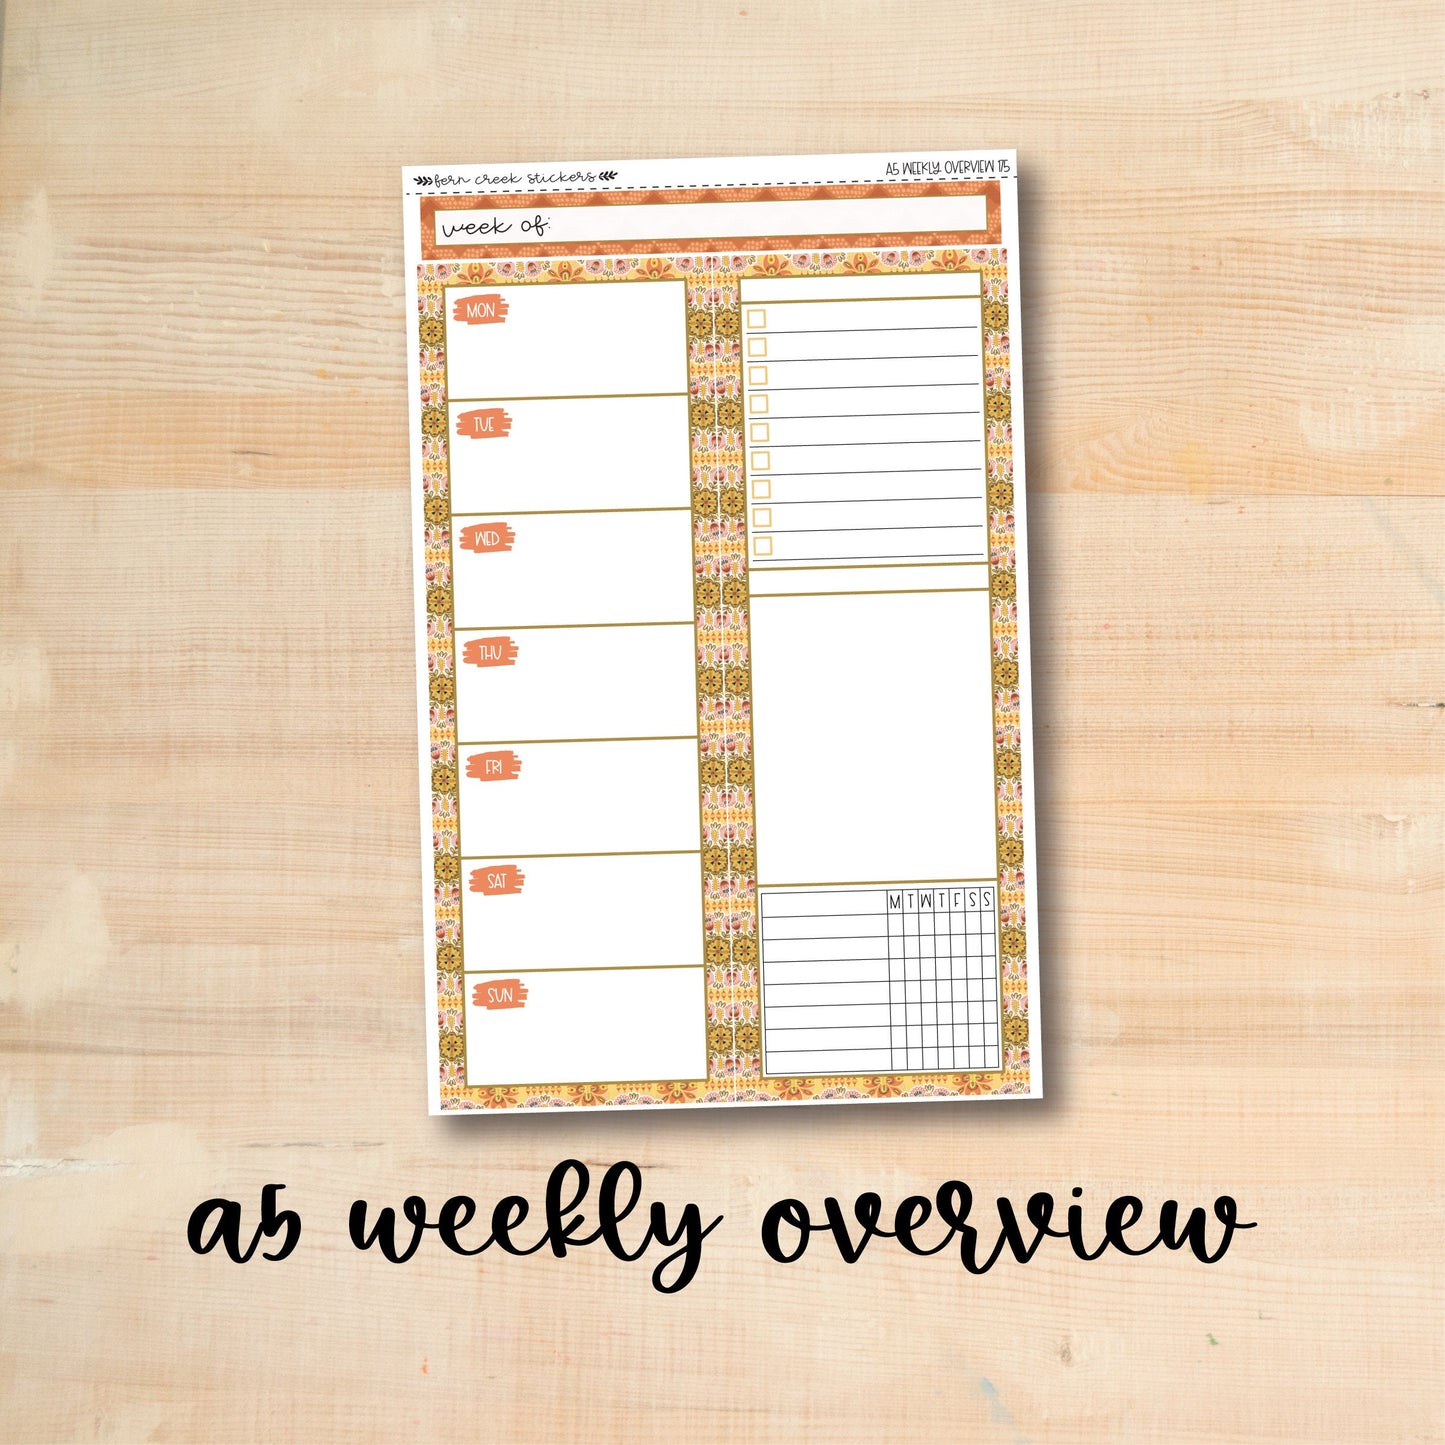 A5-WO 175 || BOHO TROPICAL A5 Daily Duo Erin Condren Weekly Overview